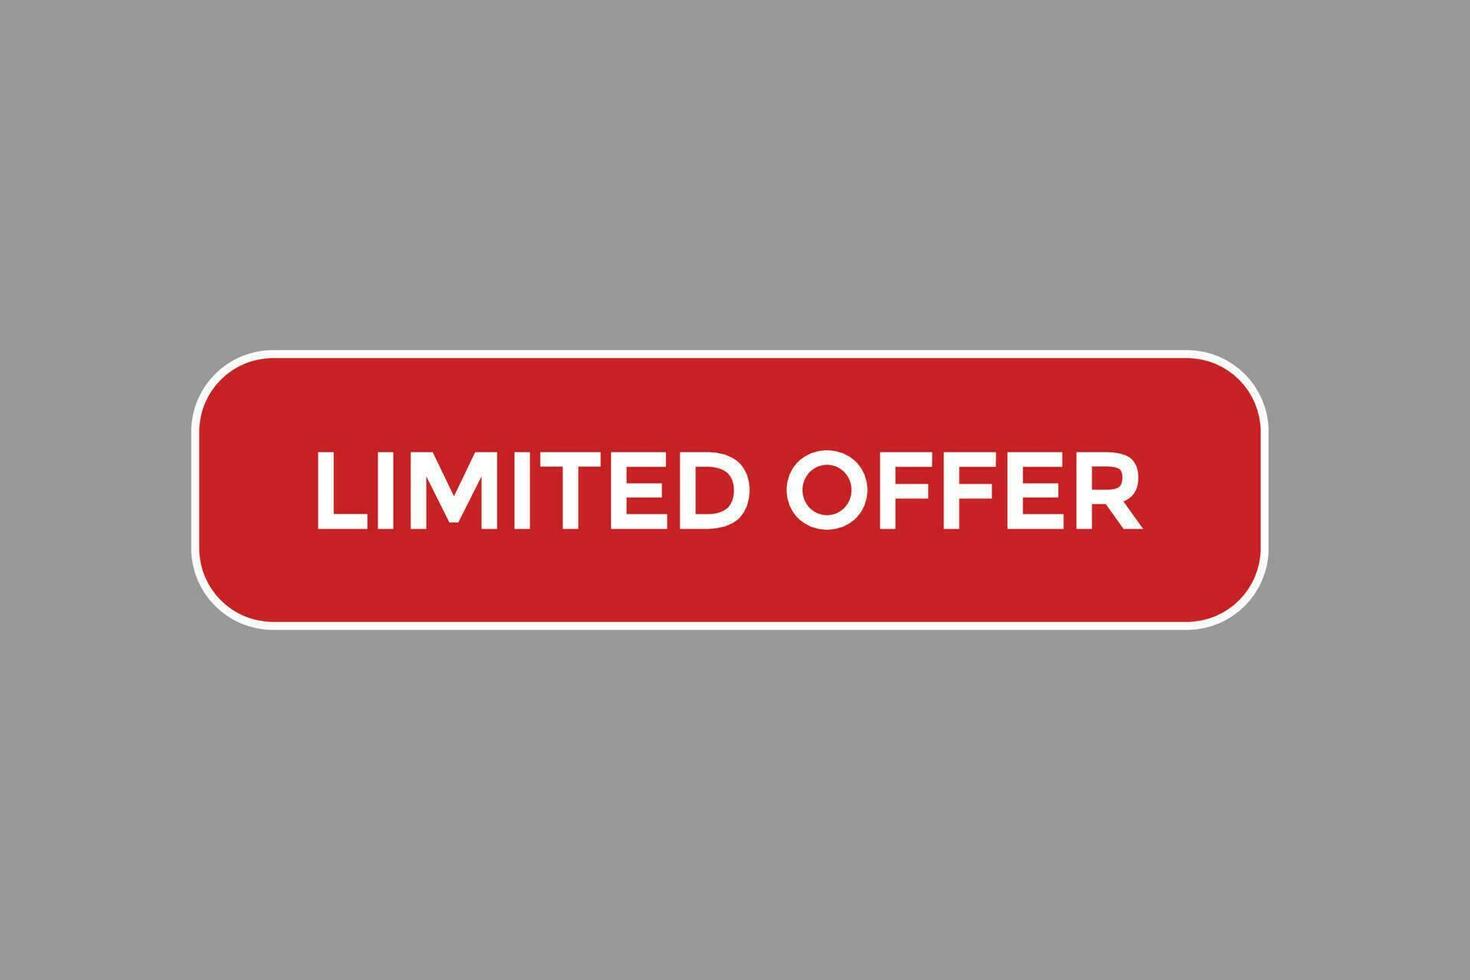 limited offer vectors.sign label bubble speech limited offer vector